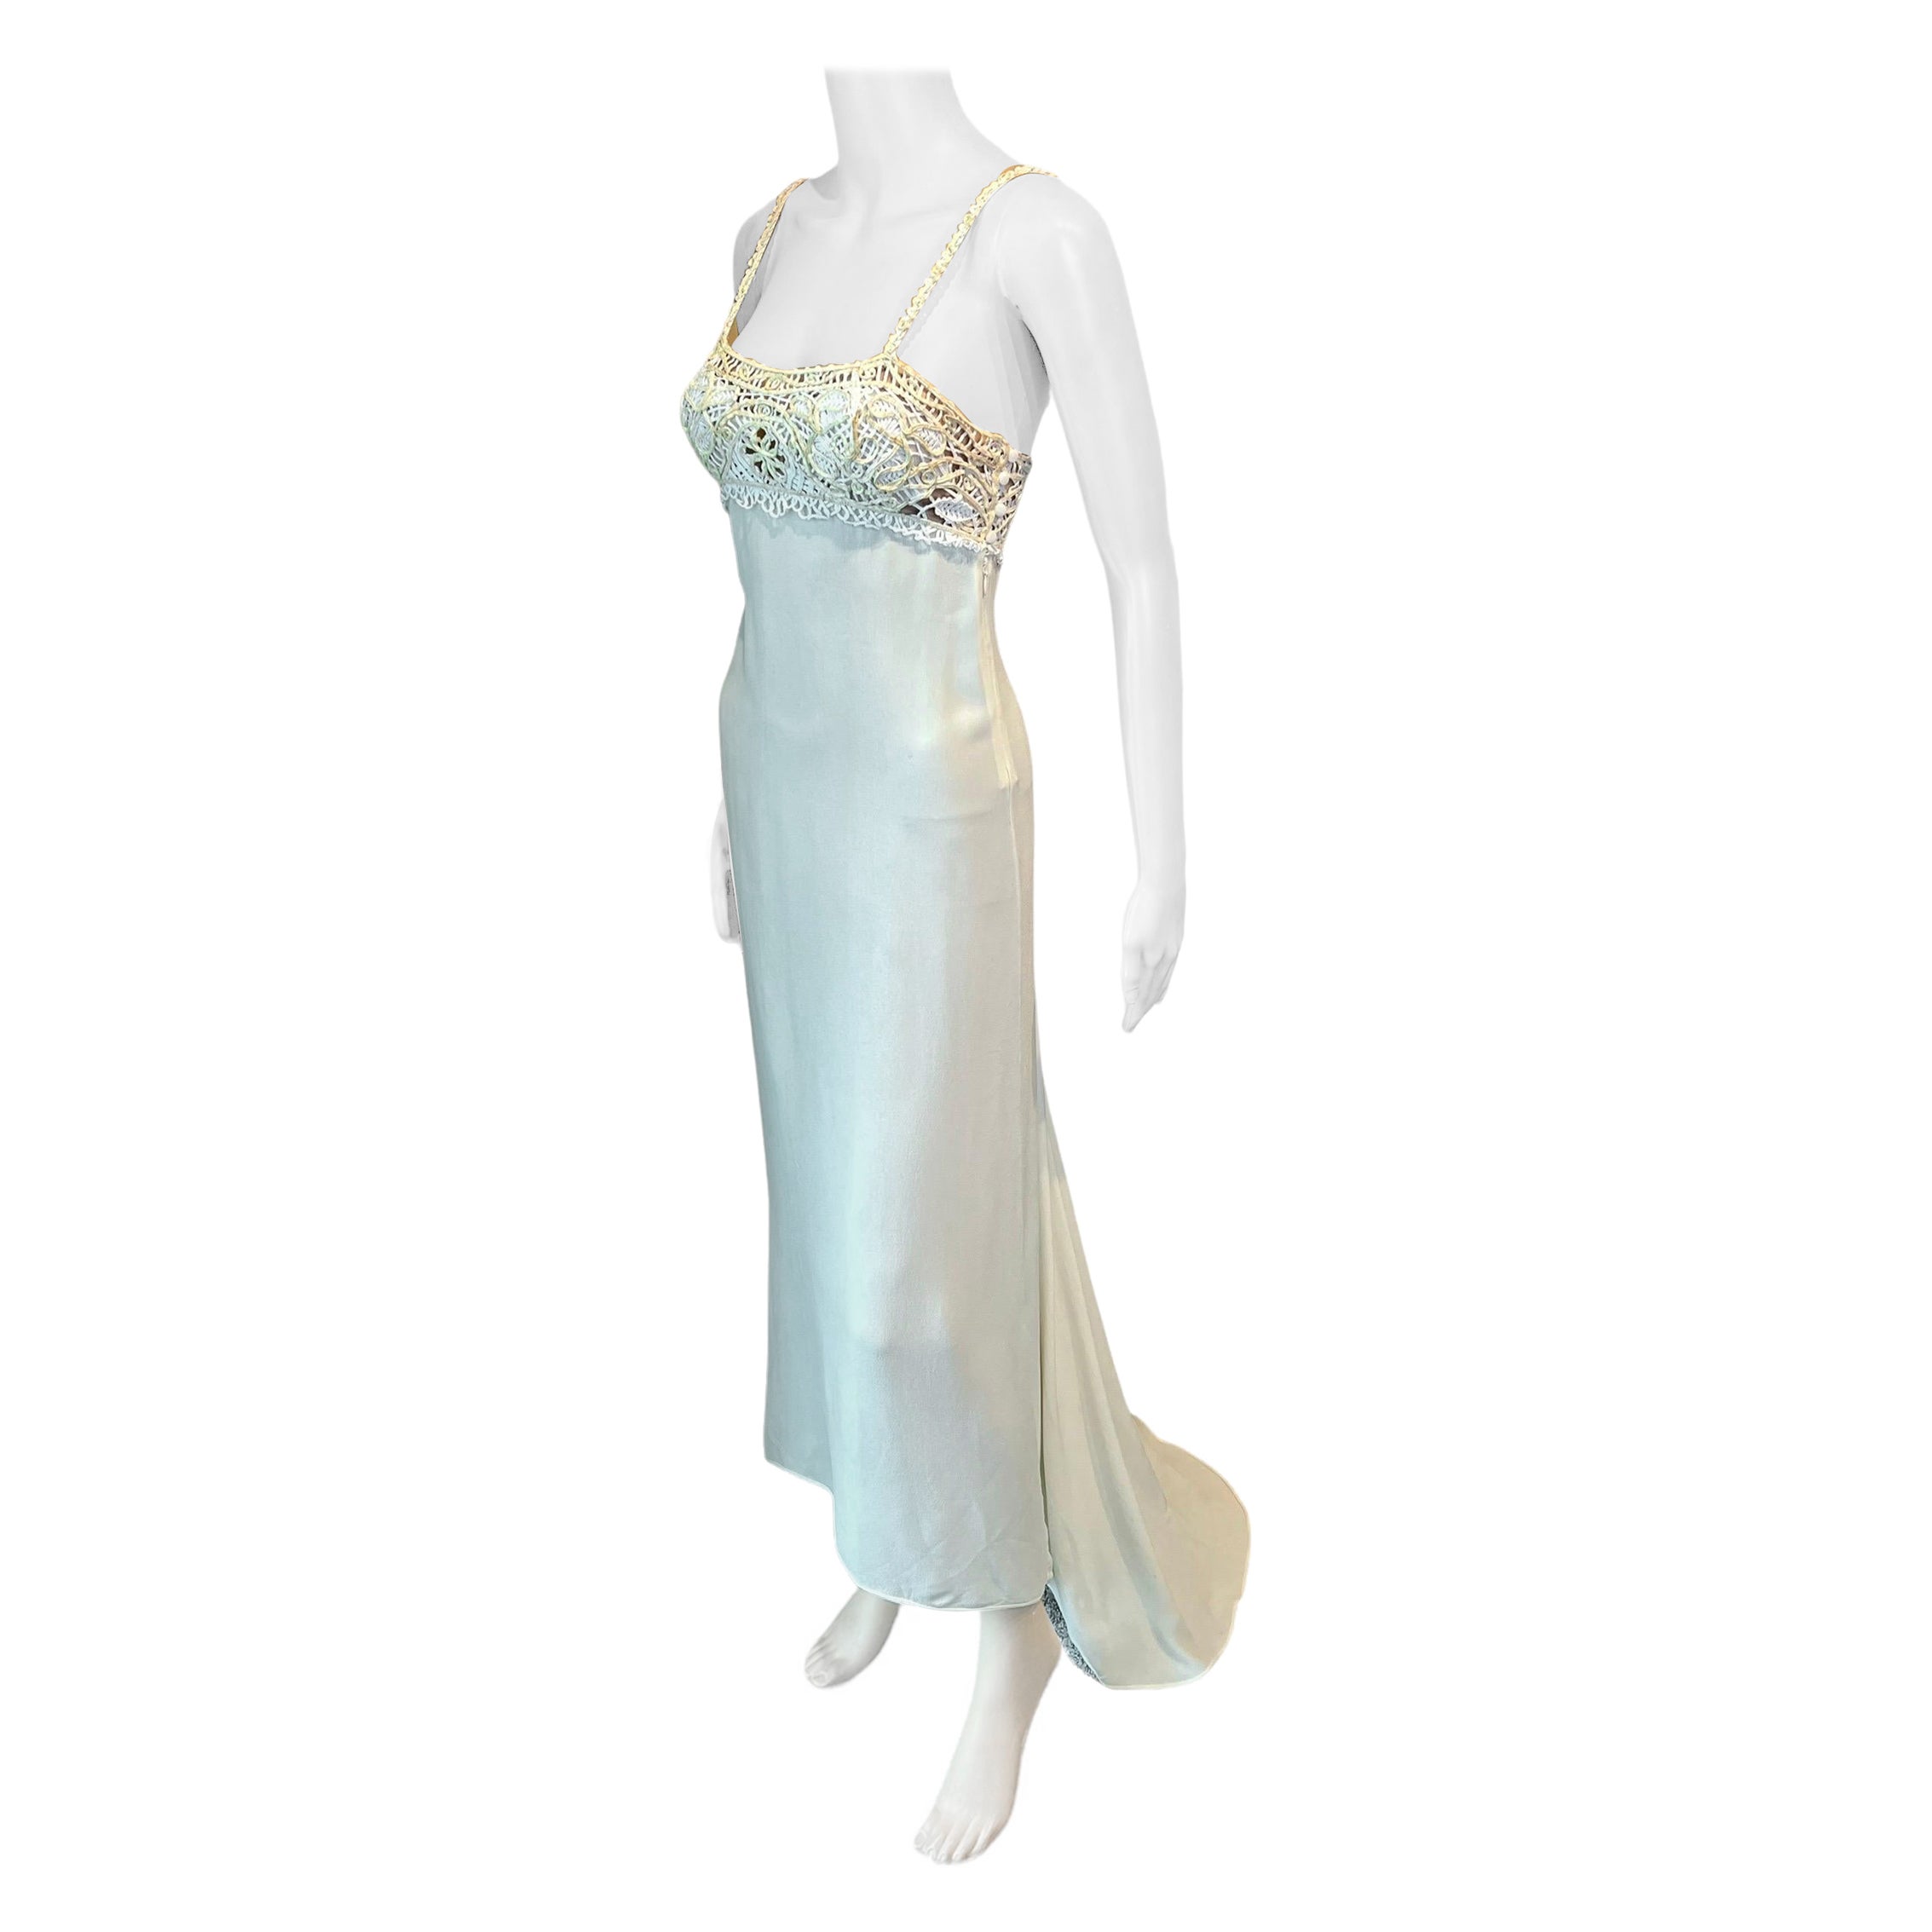 Gianni Versace S/S 1997 Runway Embroidered Lace Ivory Evening Dress Gown 